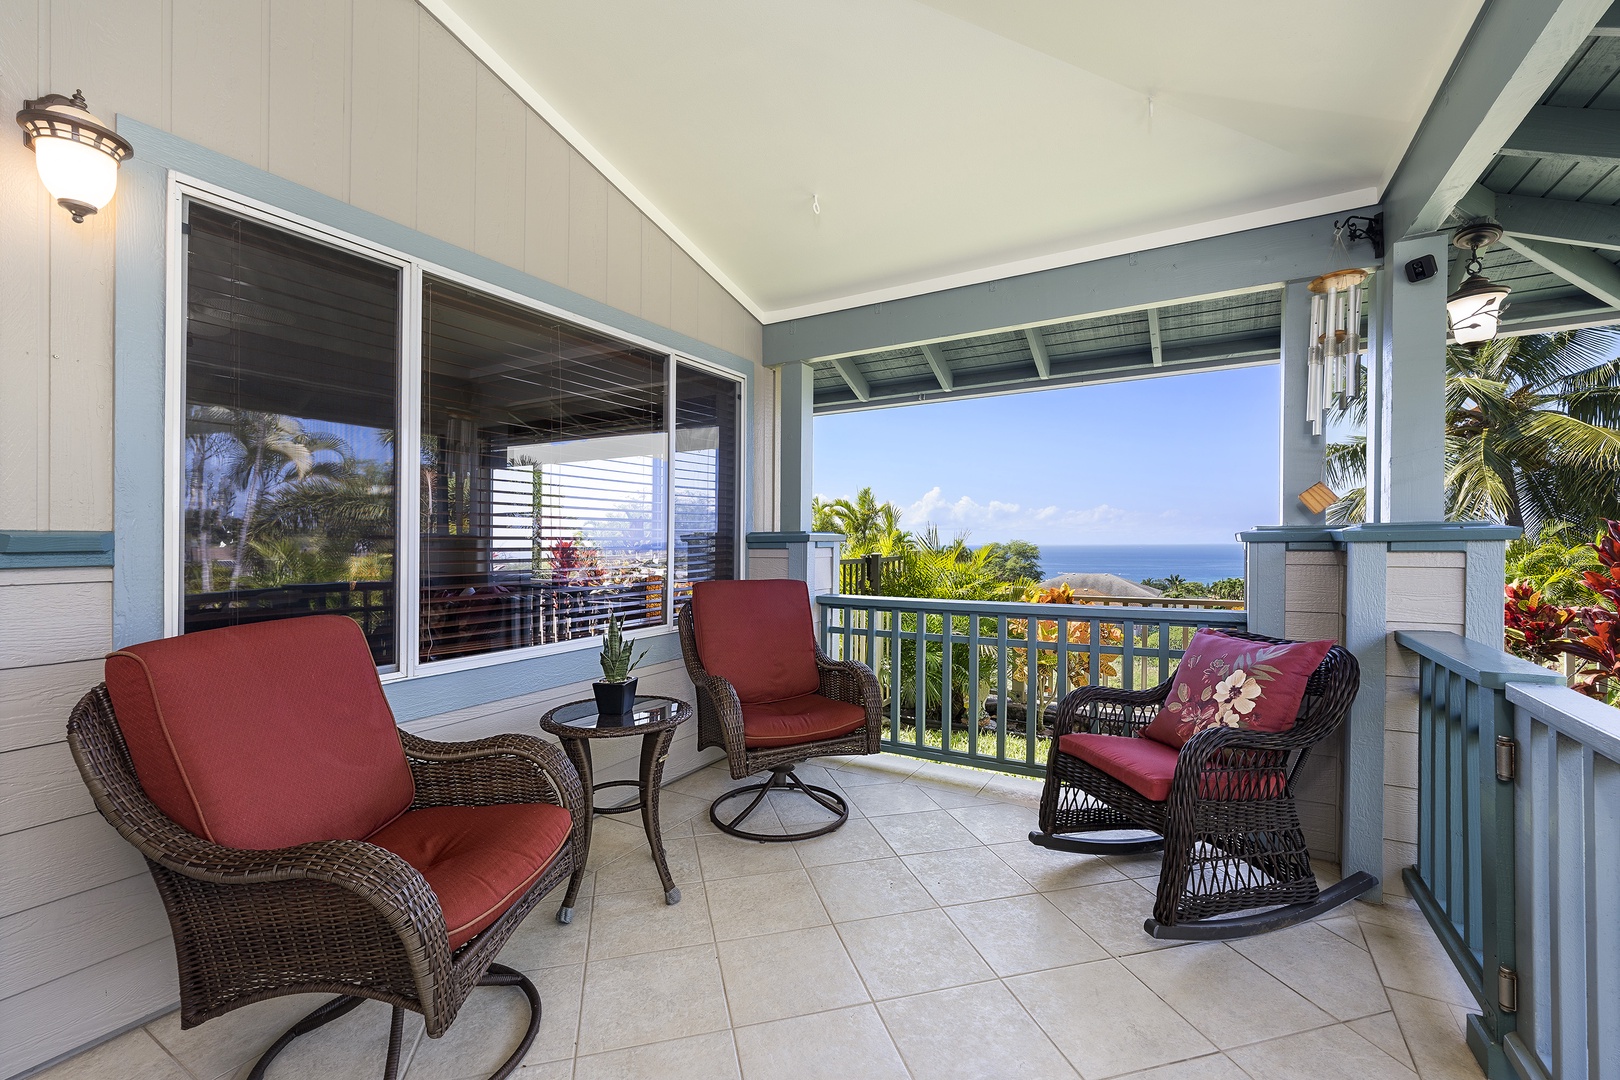 Kailua Kona Vacation Rentals, Malulani Retreat - Great Lanai space for your reading and relaxing time